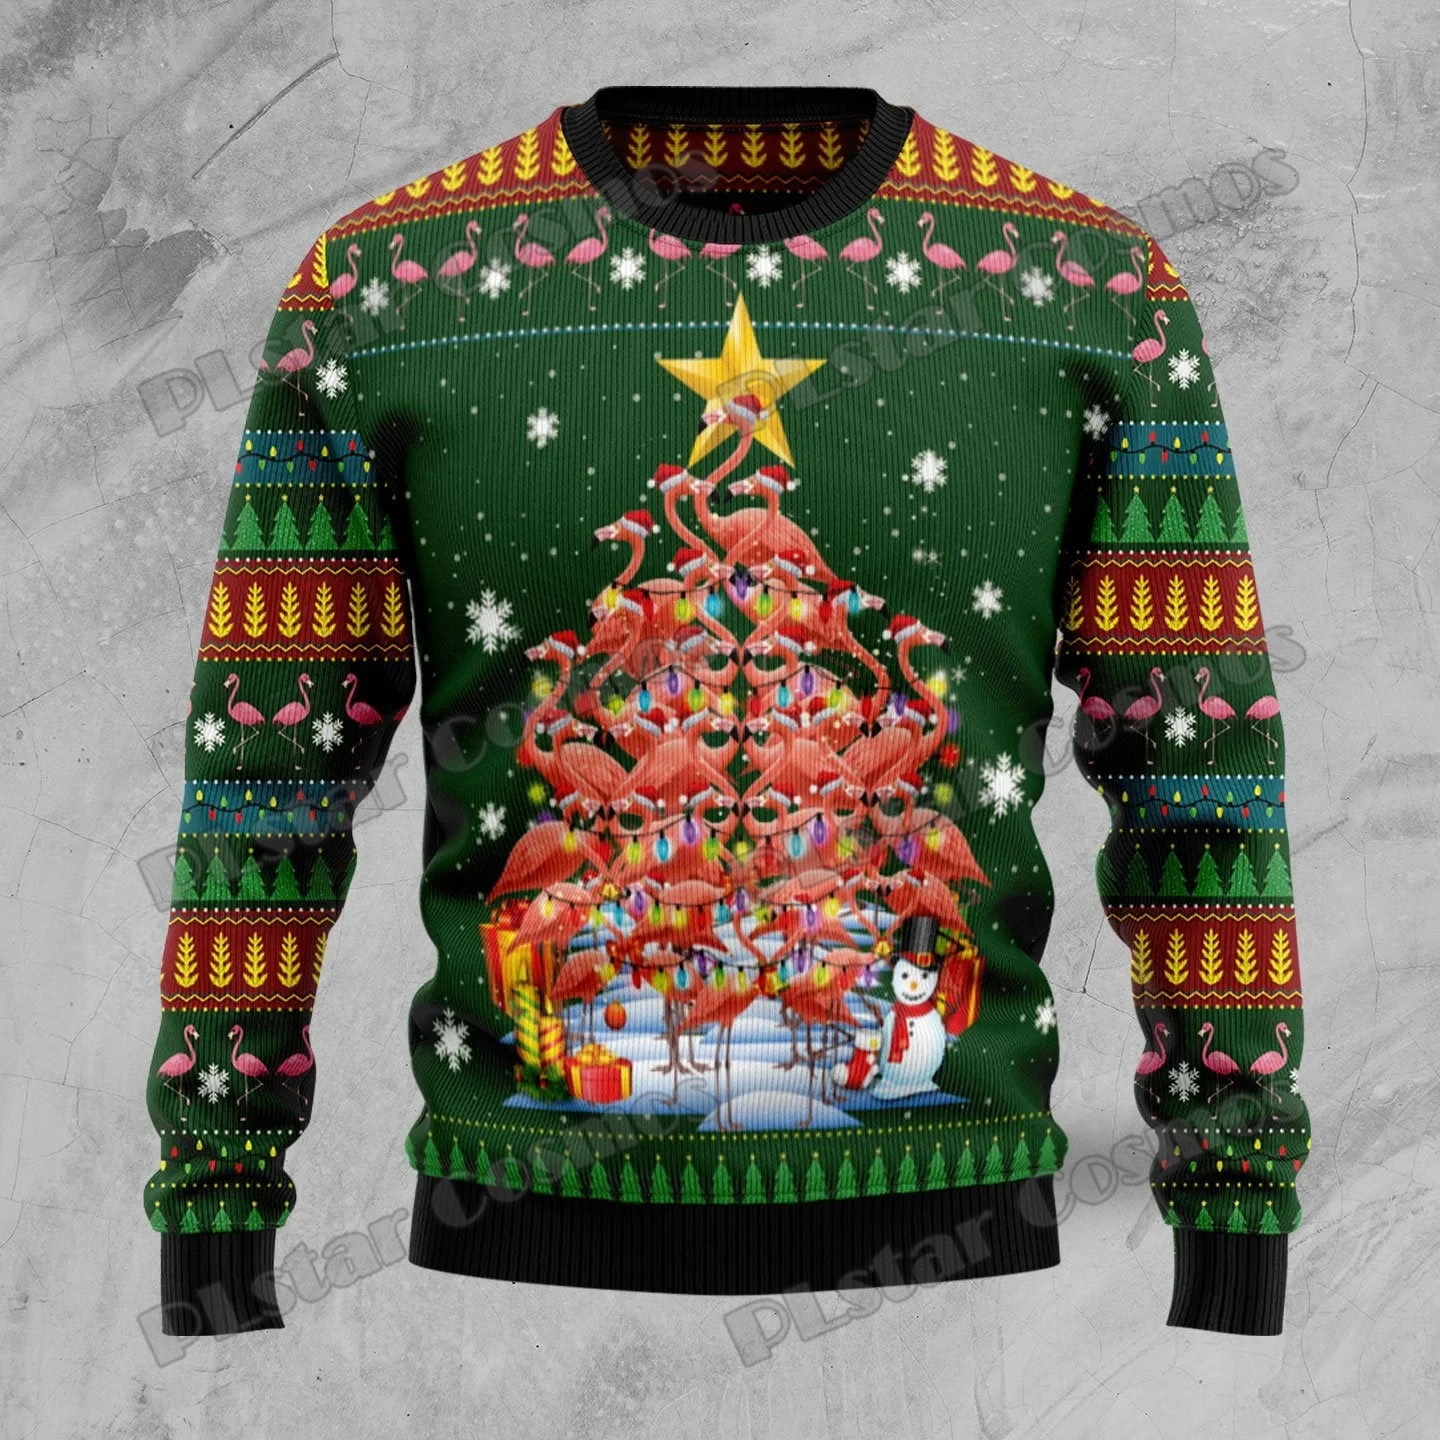 PLstar Cosmos Flamingo Christmas Tree 3D Printed Men's Ugly Christmas Sweater Winter Unisex Casual Knitwear Pullover MYY05